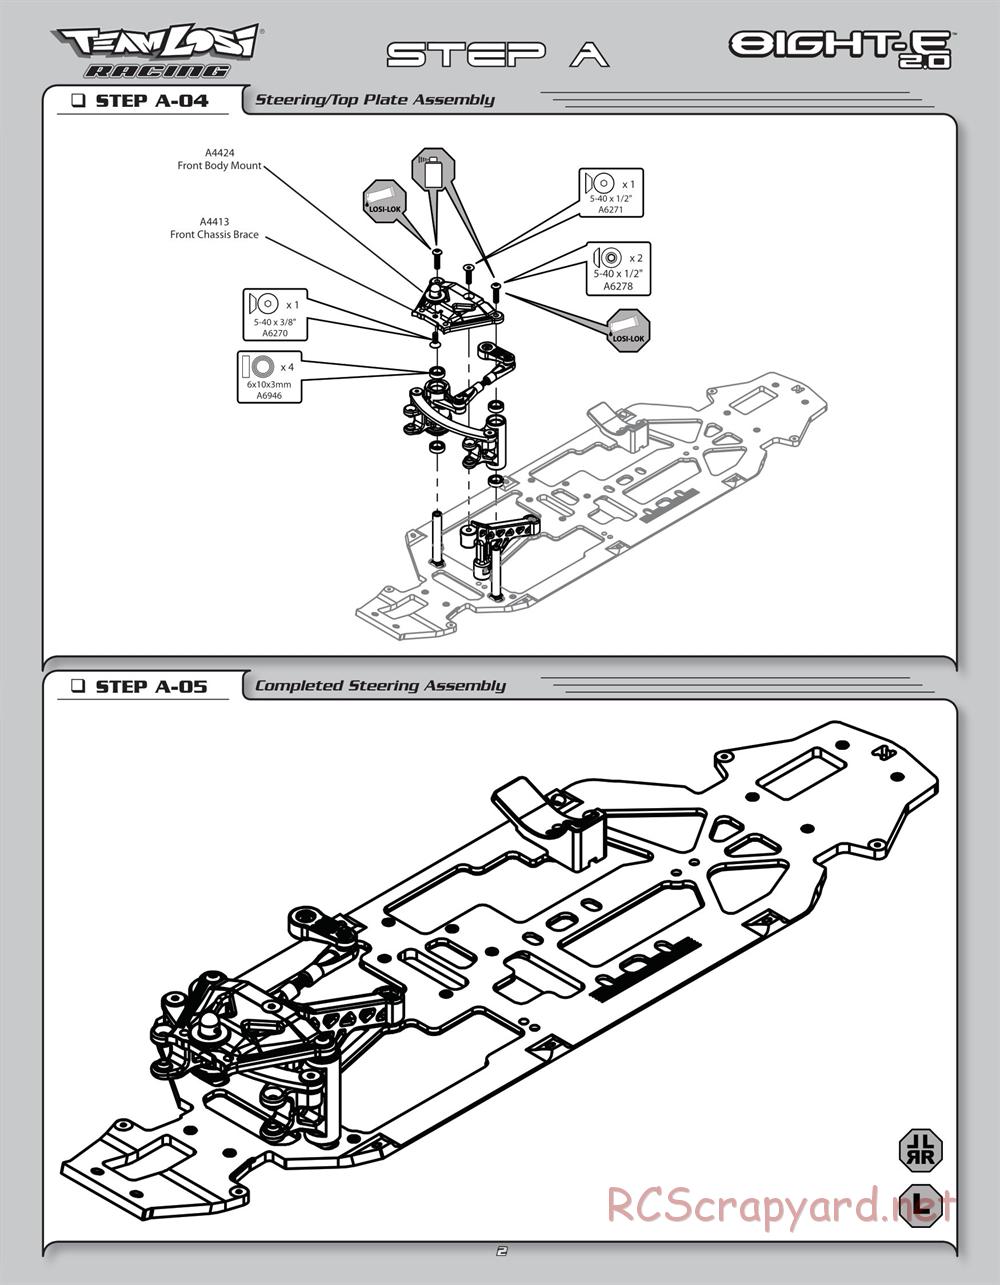 Team Losi - 8ight-E 2.0 Race Roller - Manual - Page 5